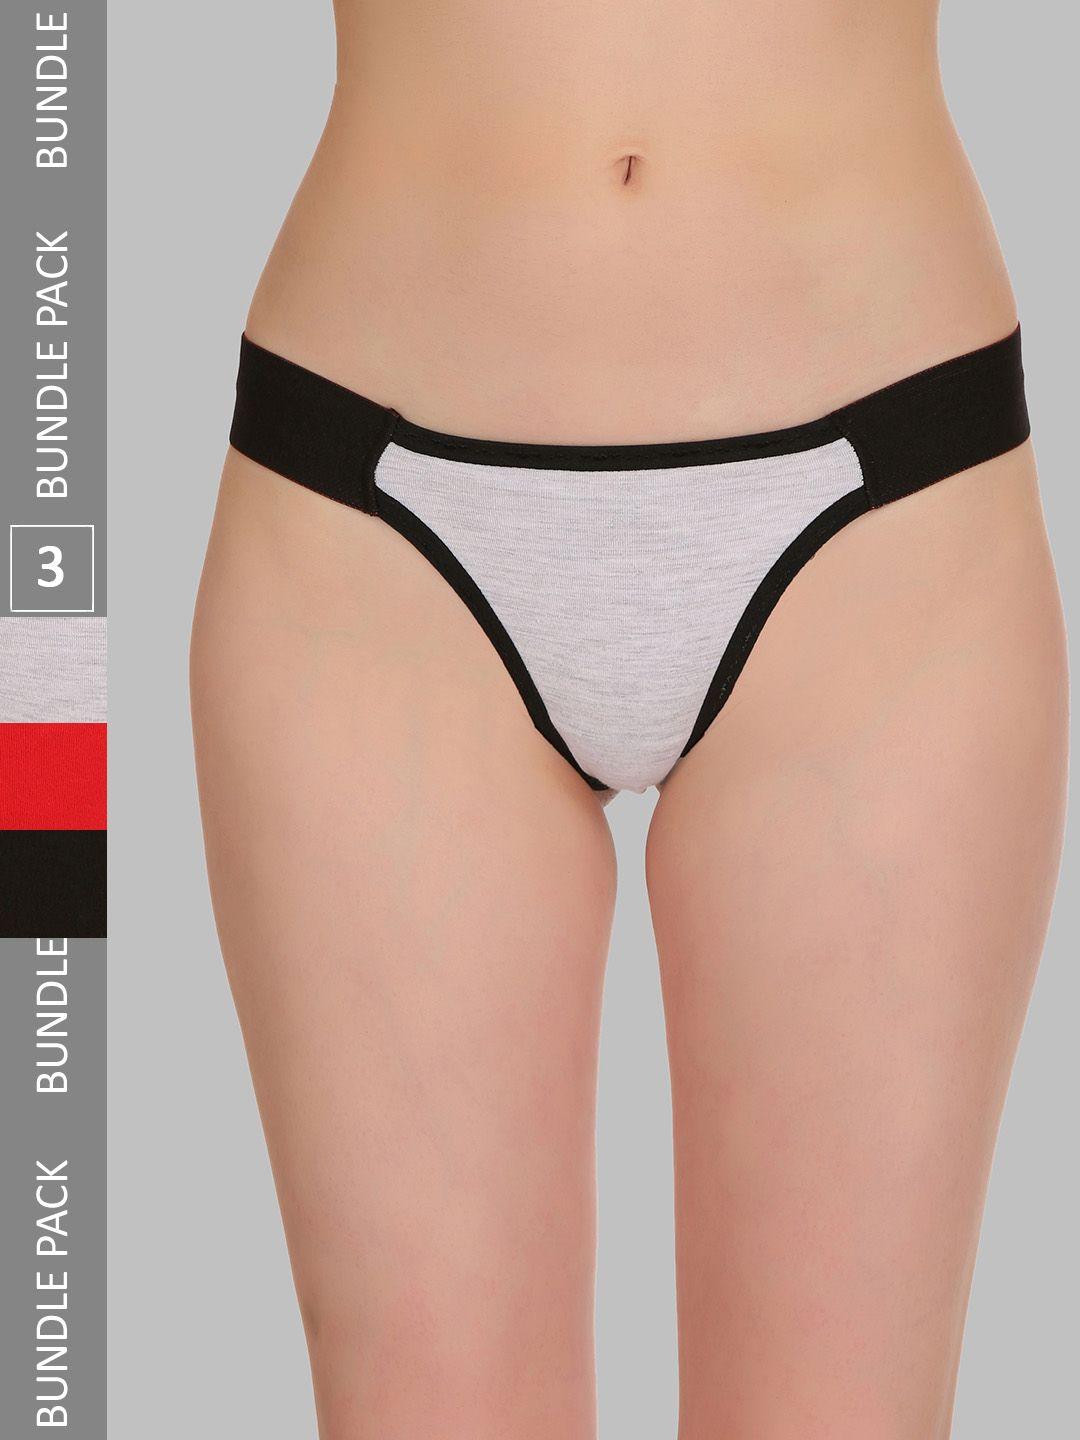 selfcare pack of 3 colourblocked thong briefs sn1545n